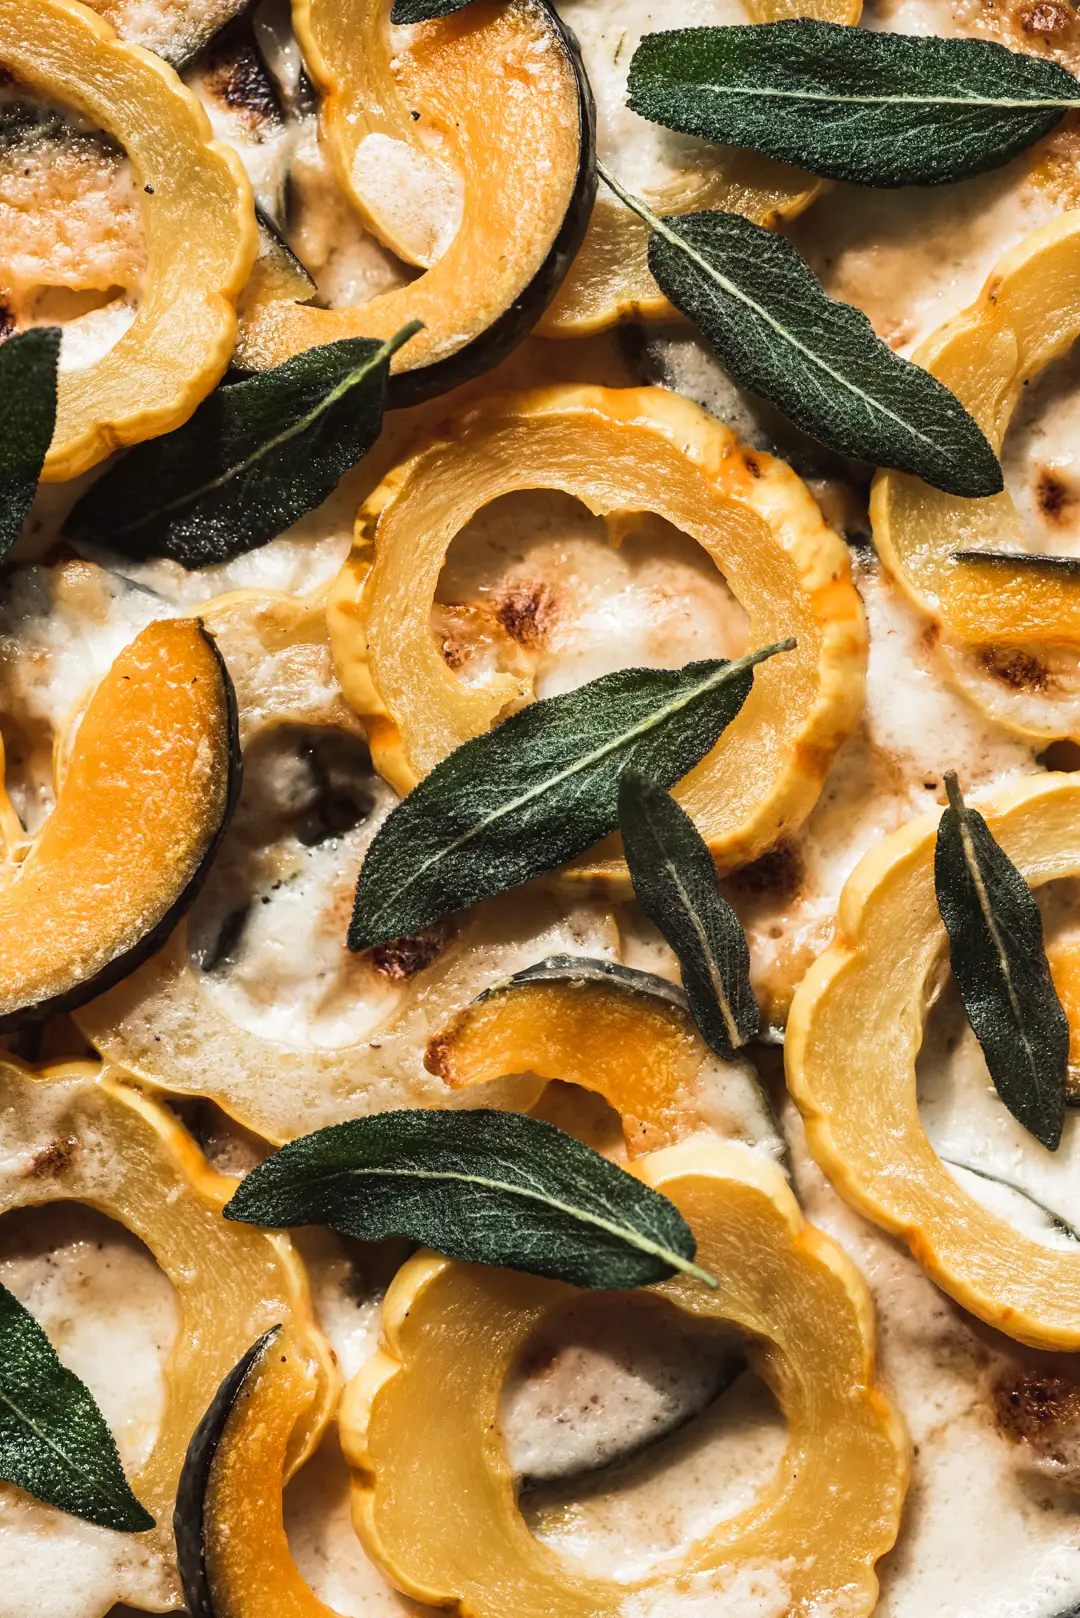 This creamy, cheesy winter squash au gratin topped with crispy sage leaves is a delicious vegetarian main course or side dish to a roast.